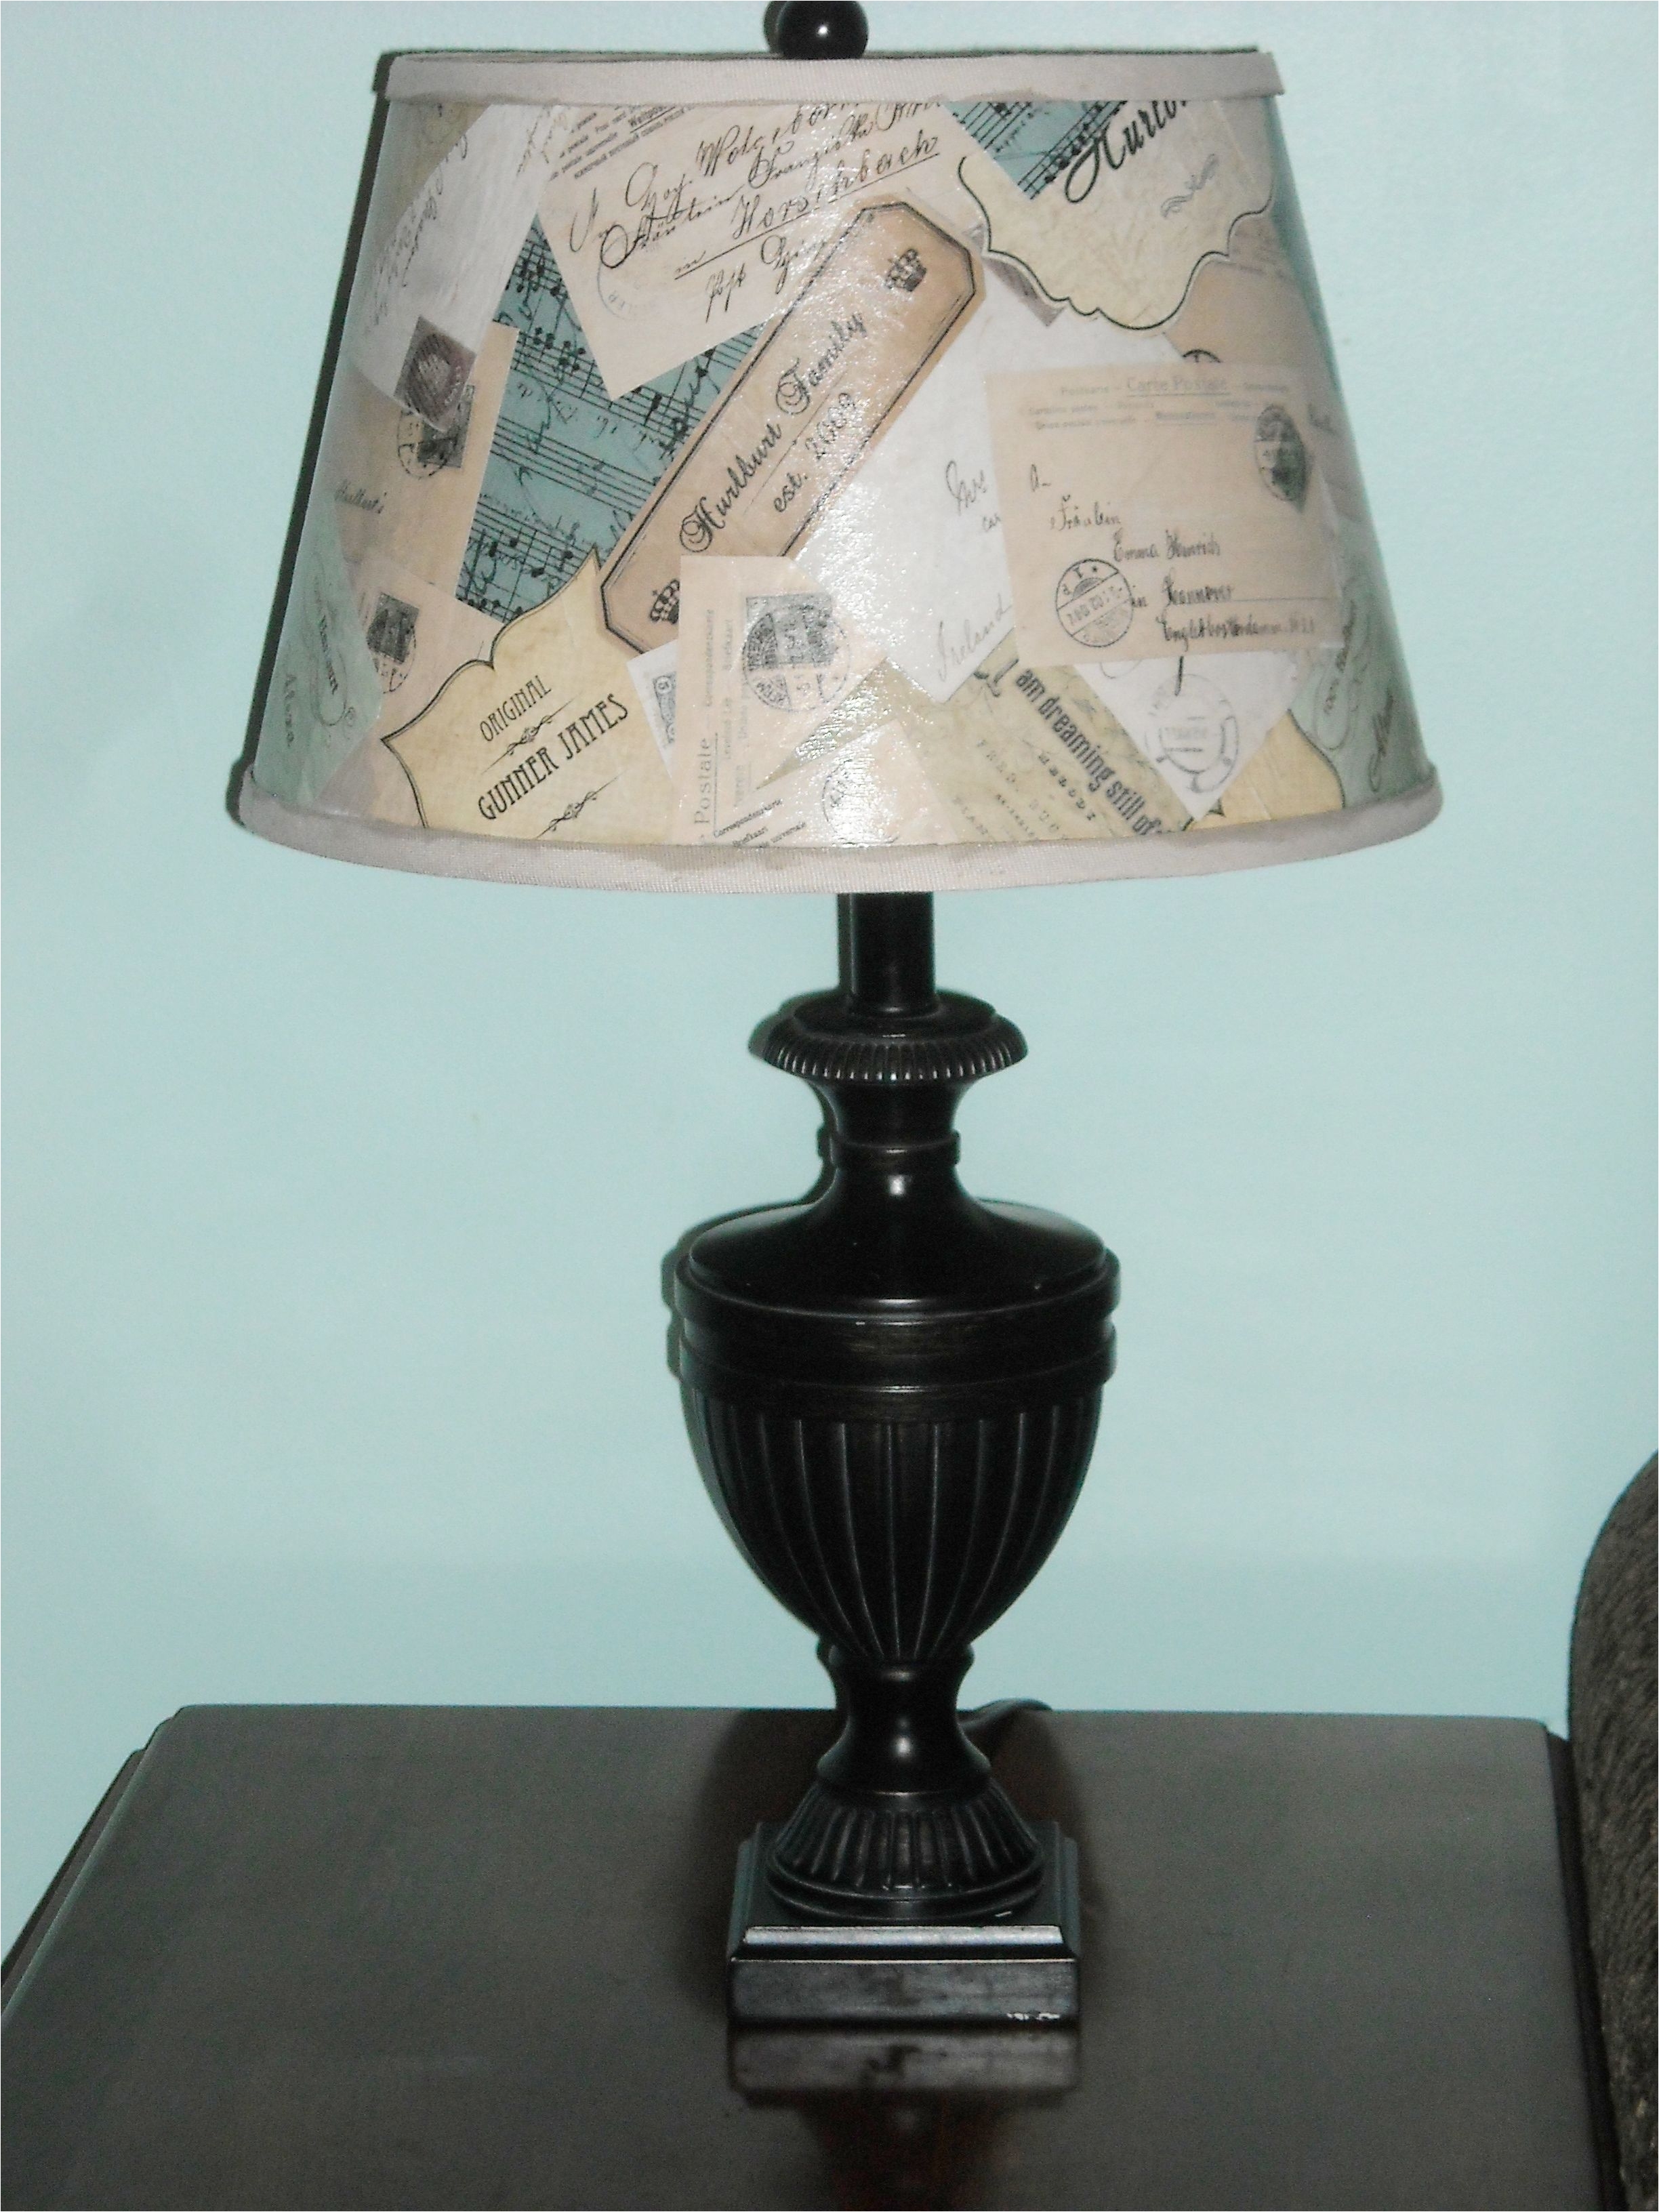 diy lamp shade makeover this wouldve been perfect for our movie ticket stubs